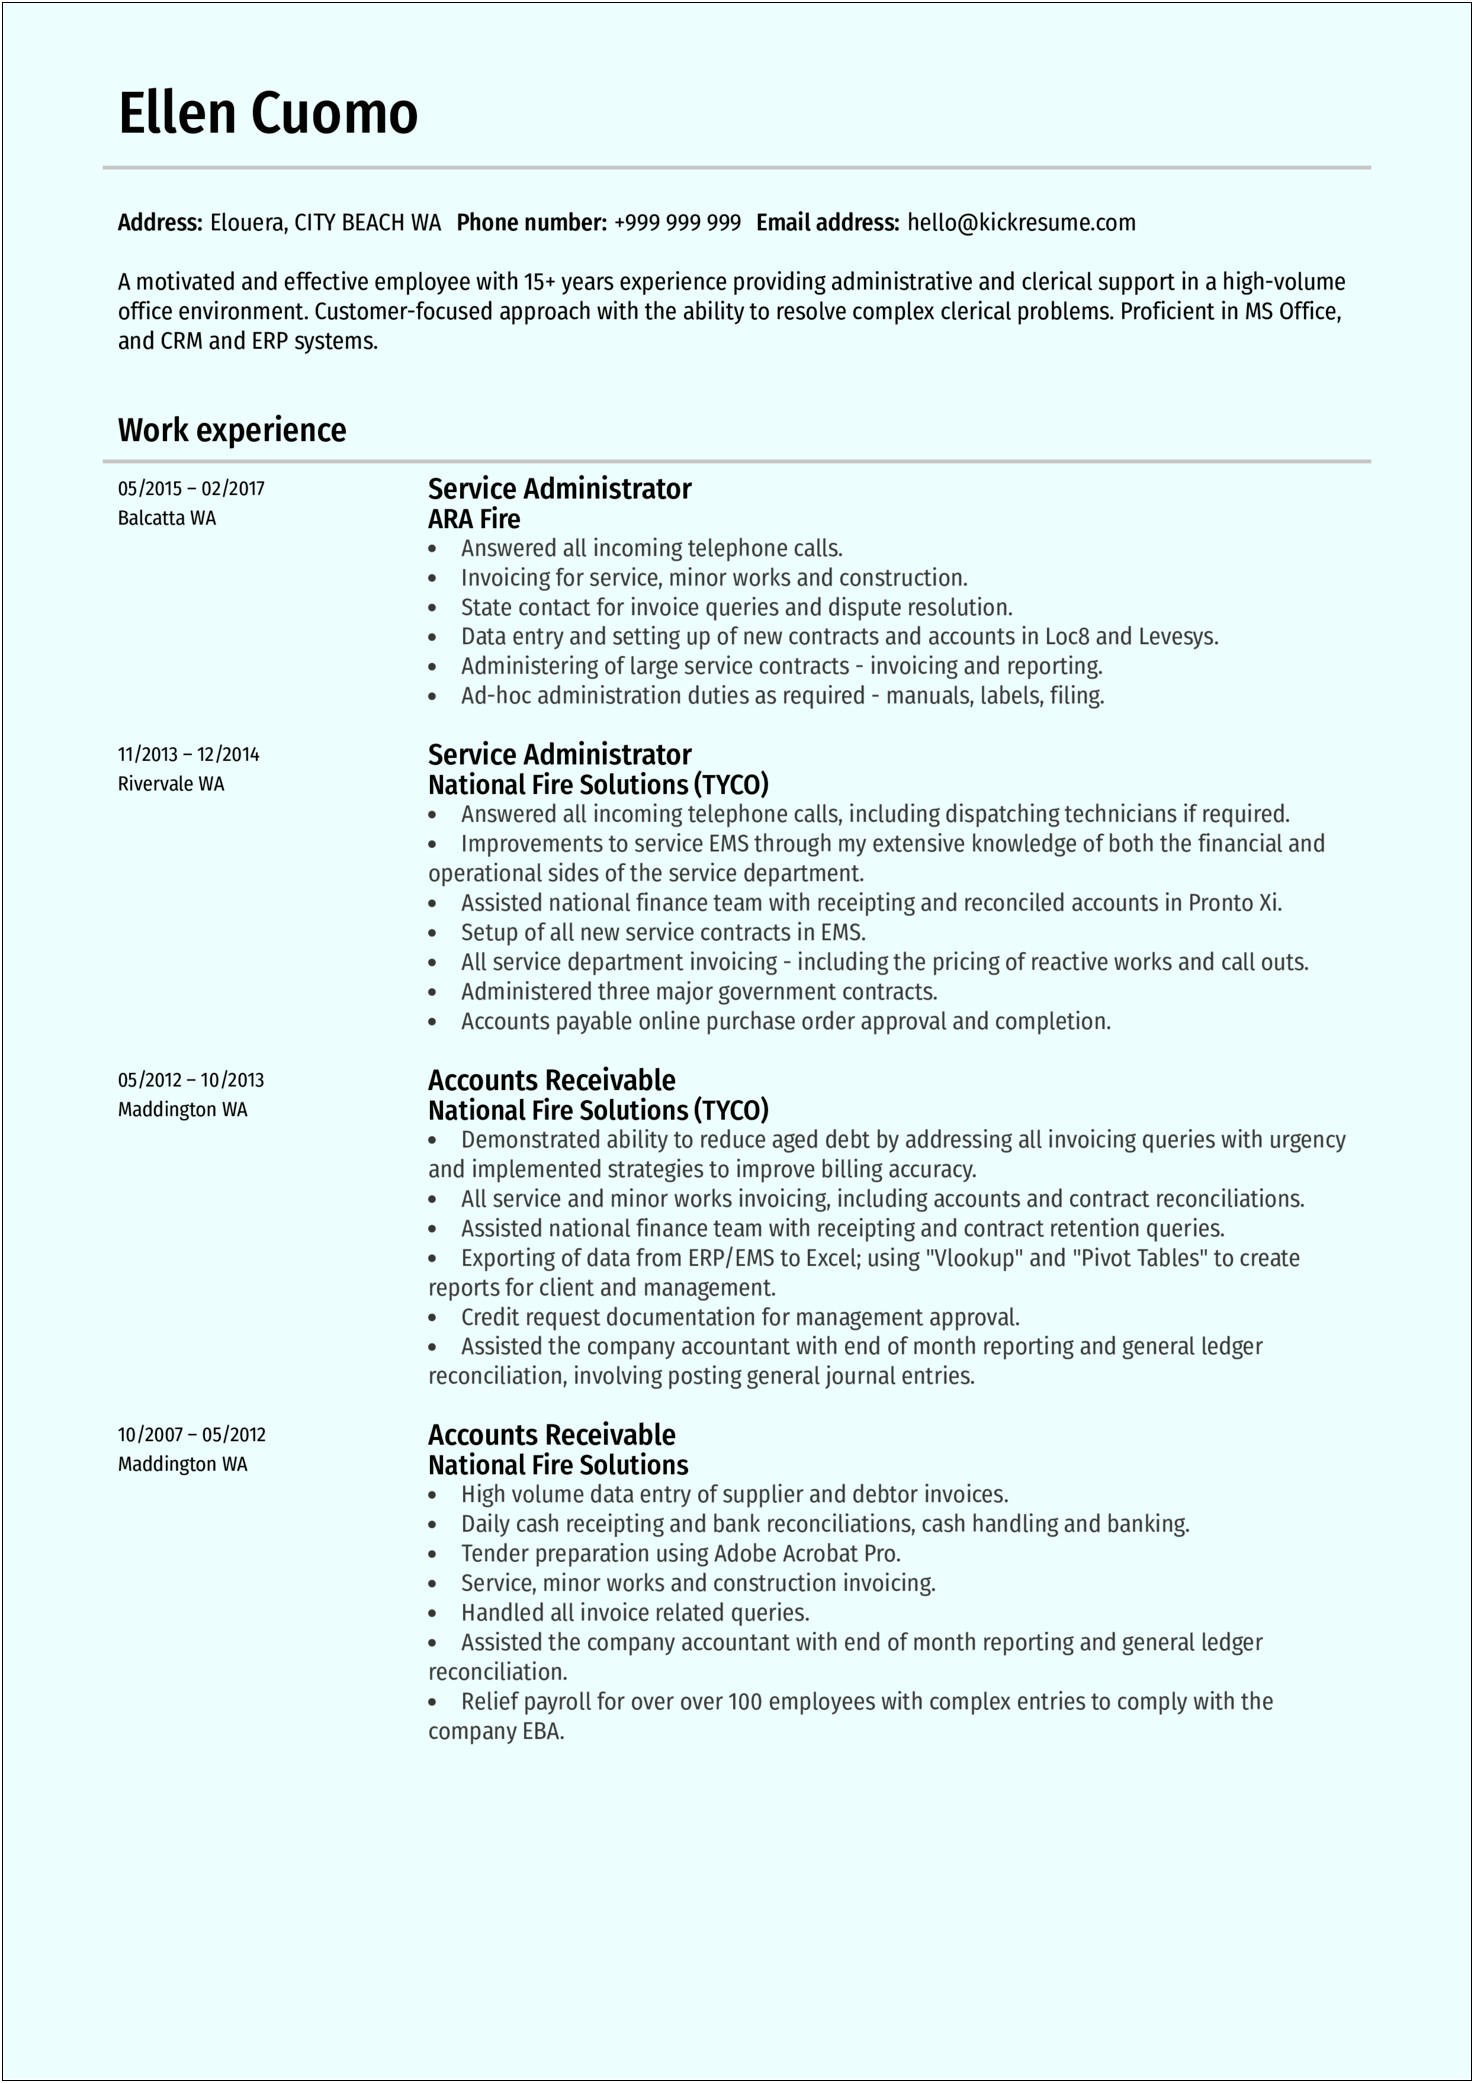 Resume Format For 15 Years Experience